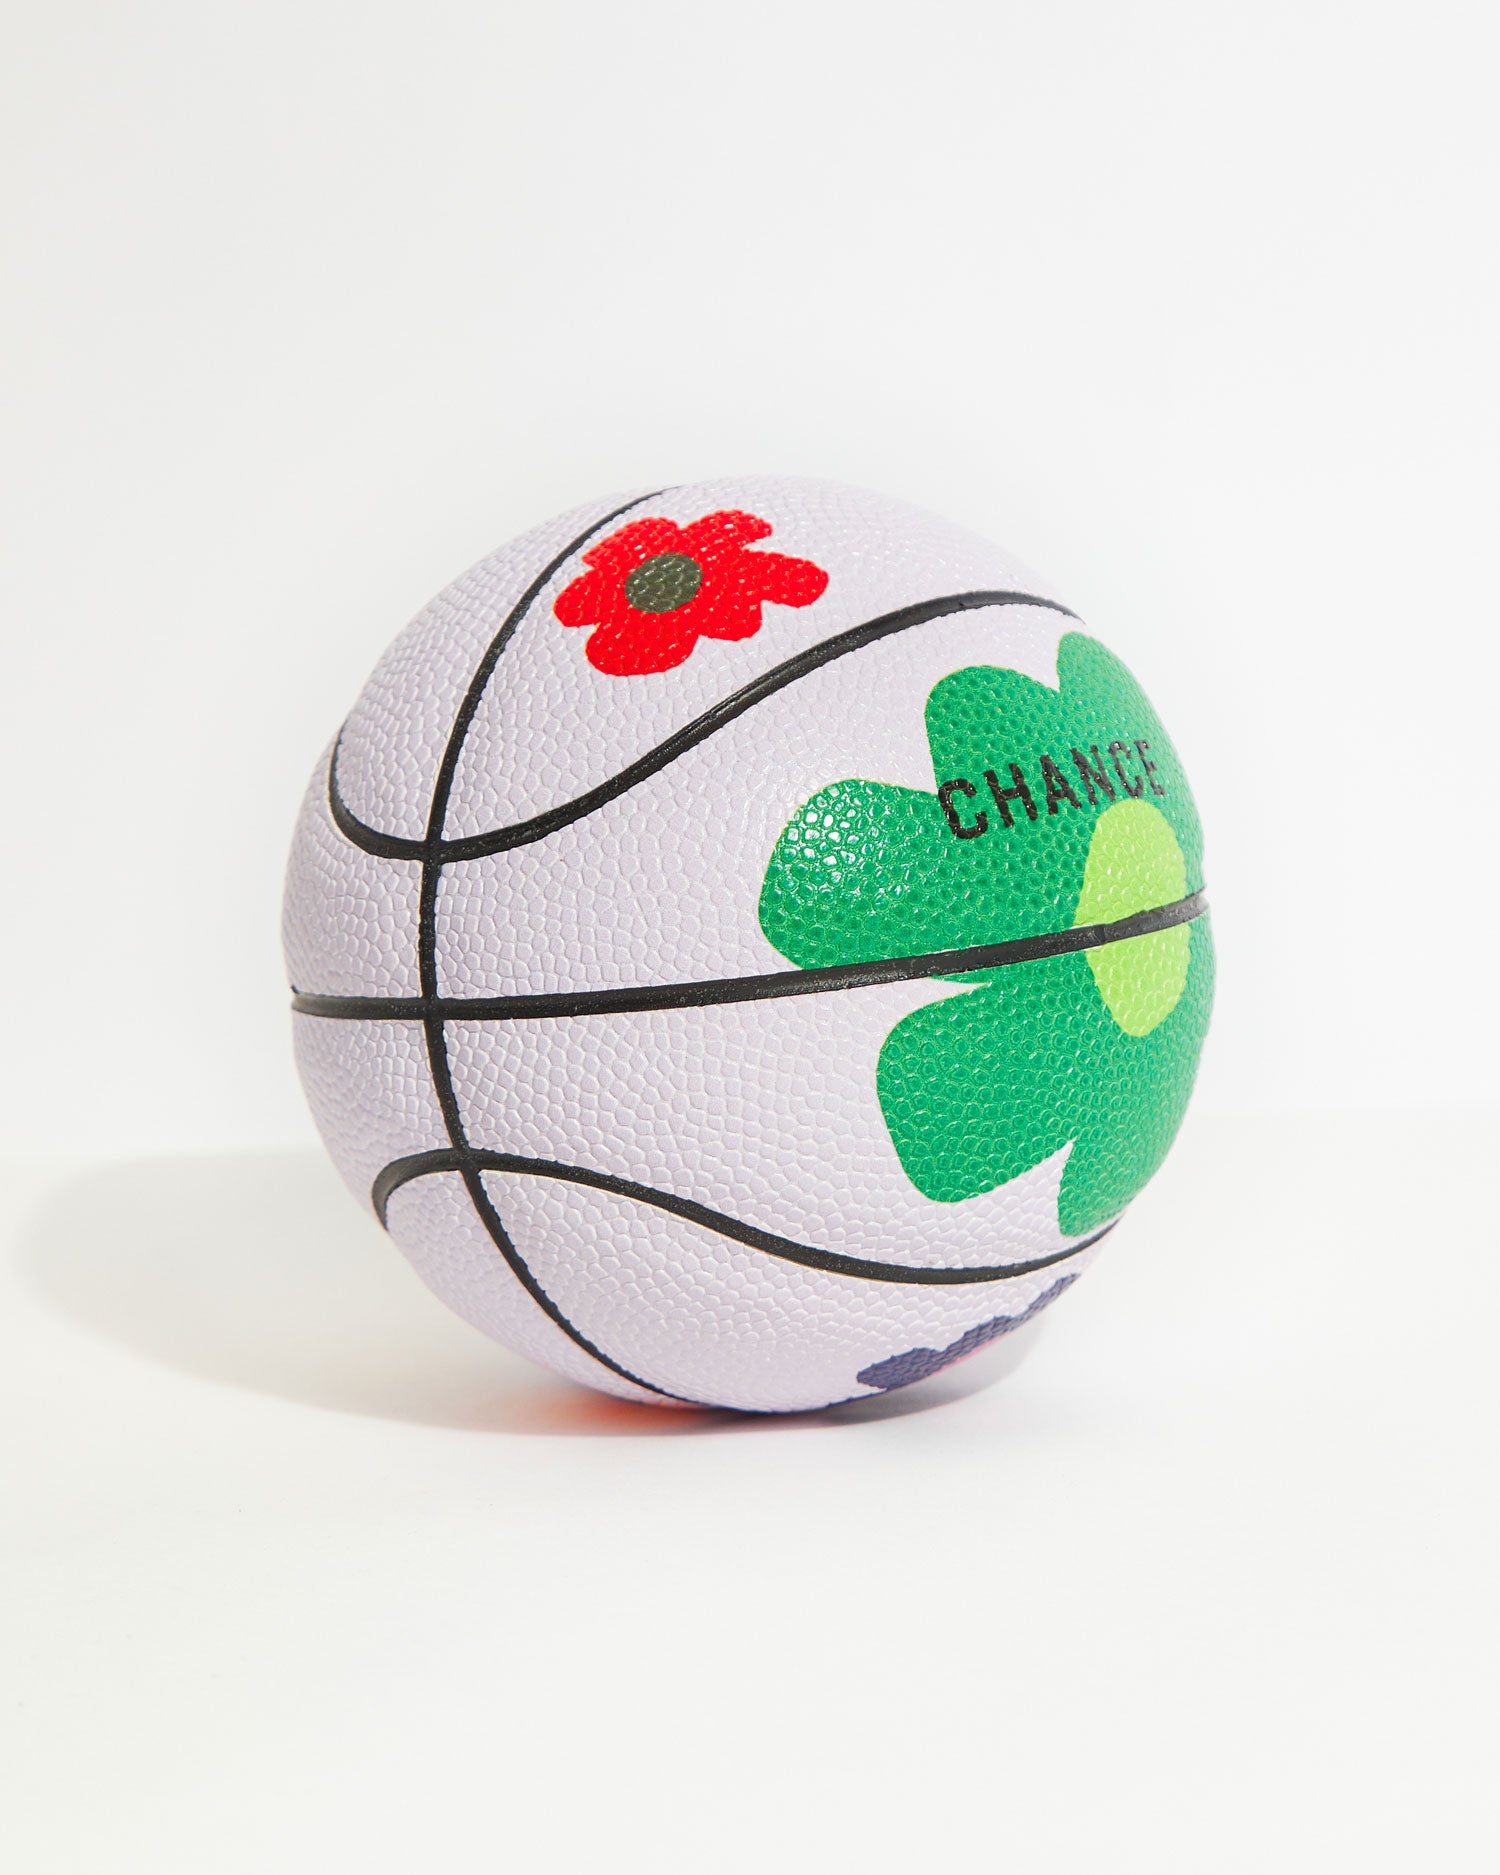 FLWRPWR Mini Composite Leather Basketball